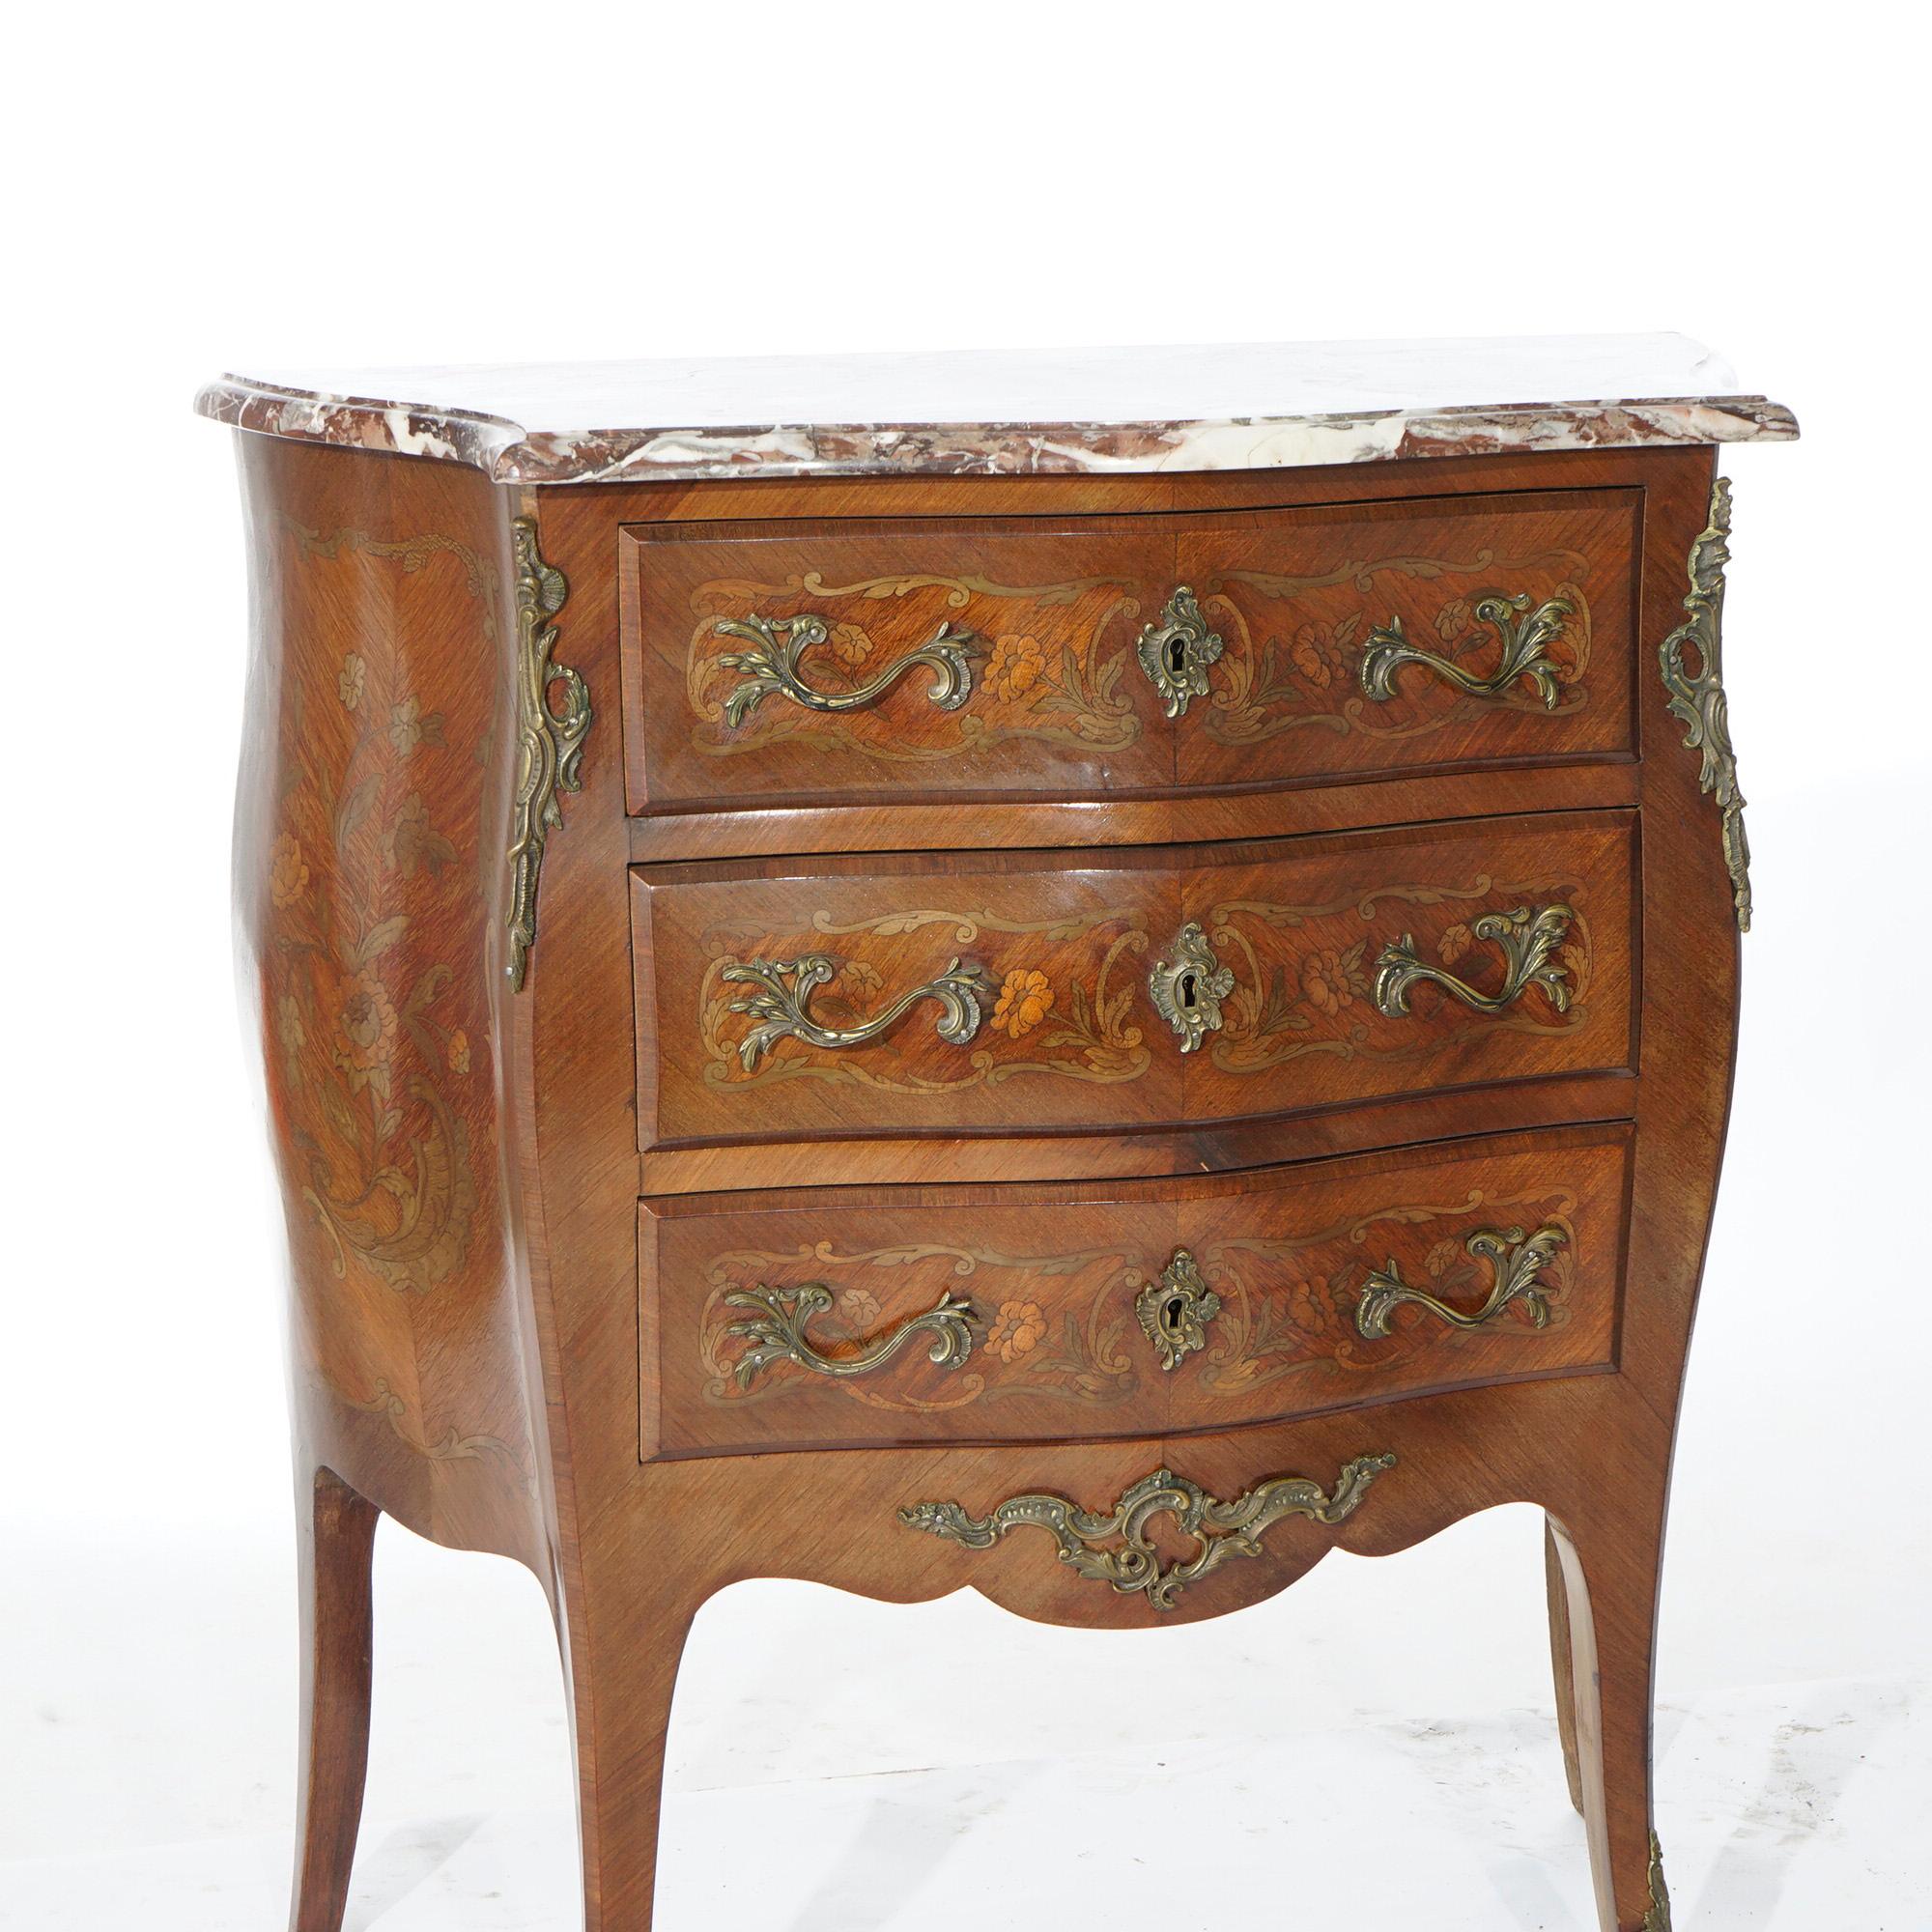 An antique French Louis XVI style bombe commode offers shaped and beveled marble top over kingwood and rosewood three drawer base having marquetry decoration throughout, cast foliate ormolu and raised on cabriole legs, c1910

Measures- 33.5''H x